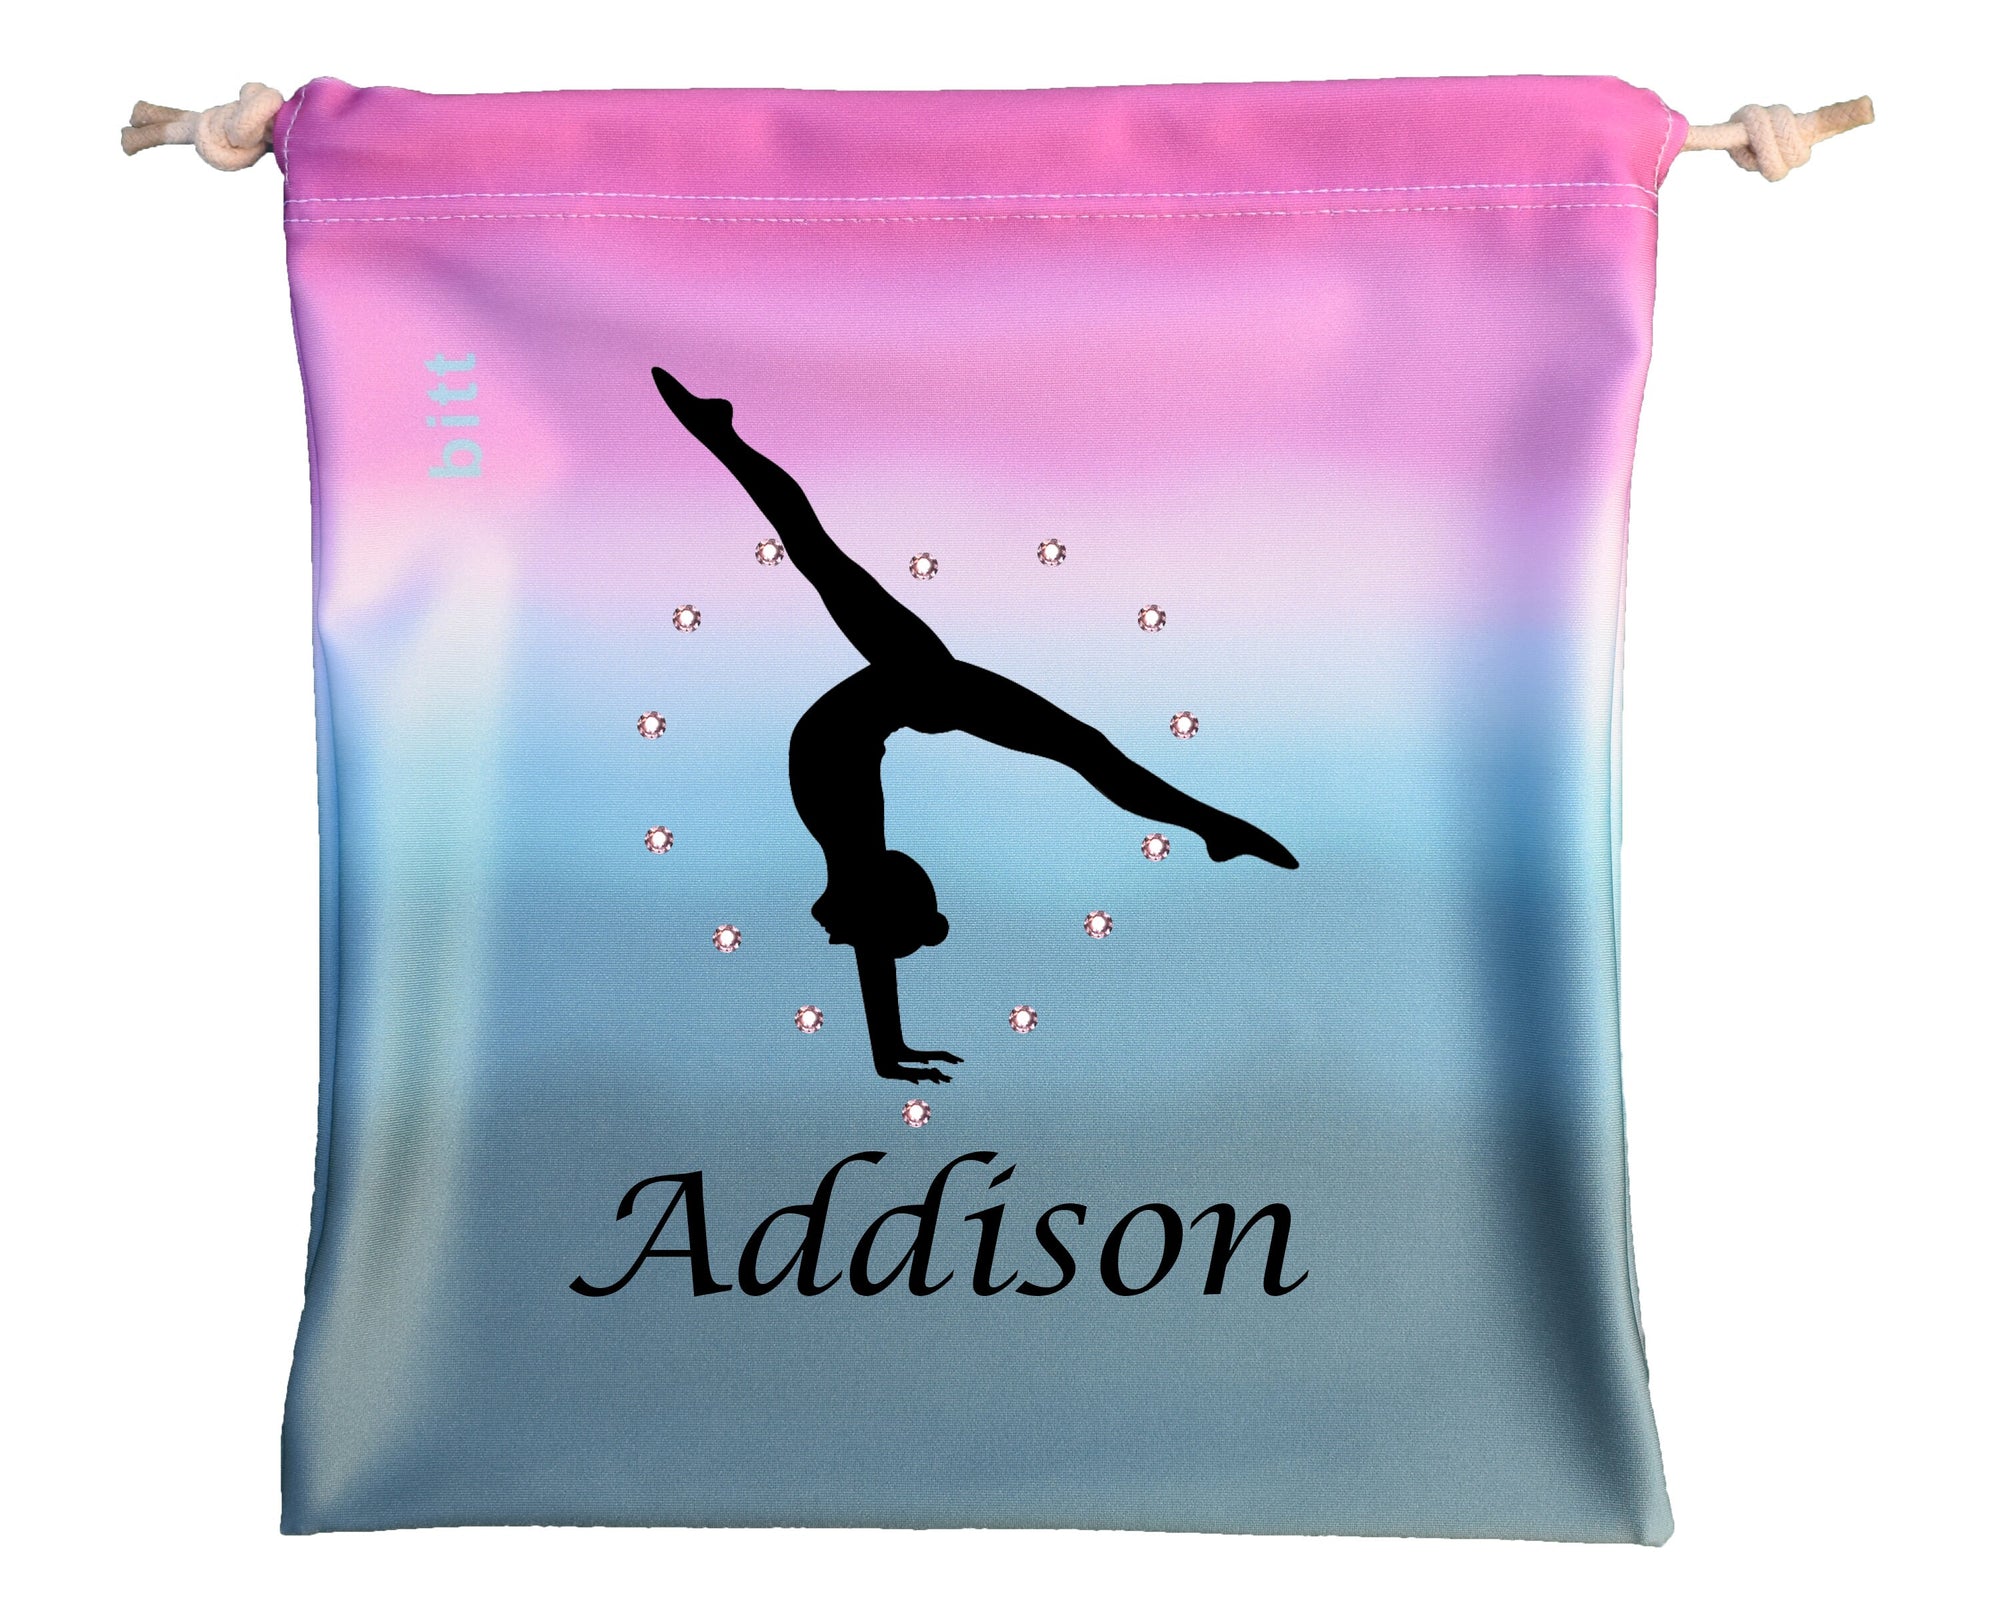 Personalized Gymnastics Grip Bag in Teal Pink Ombre with Split Handstand